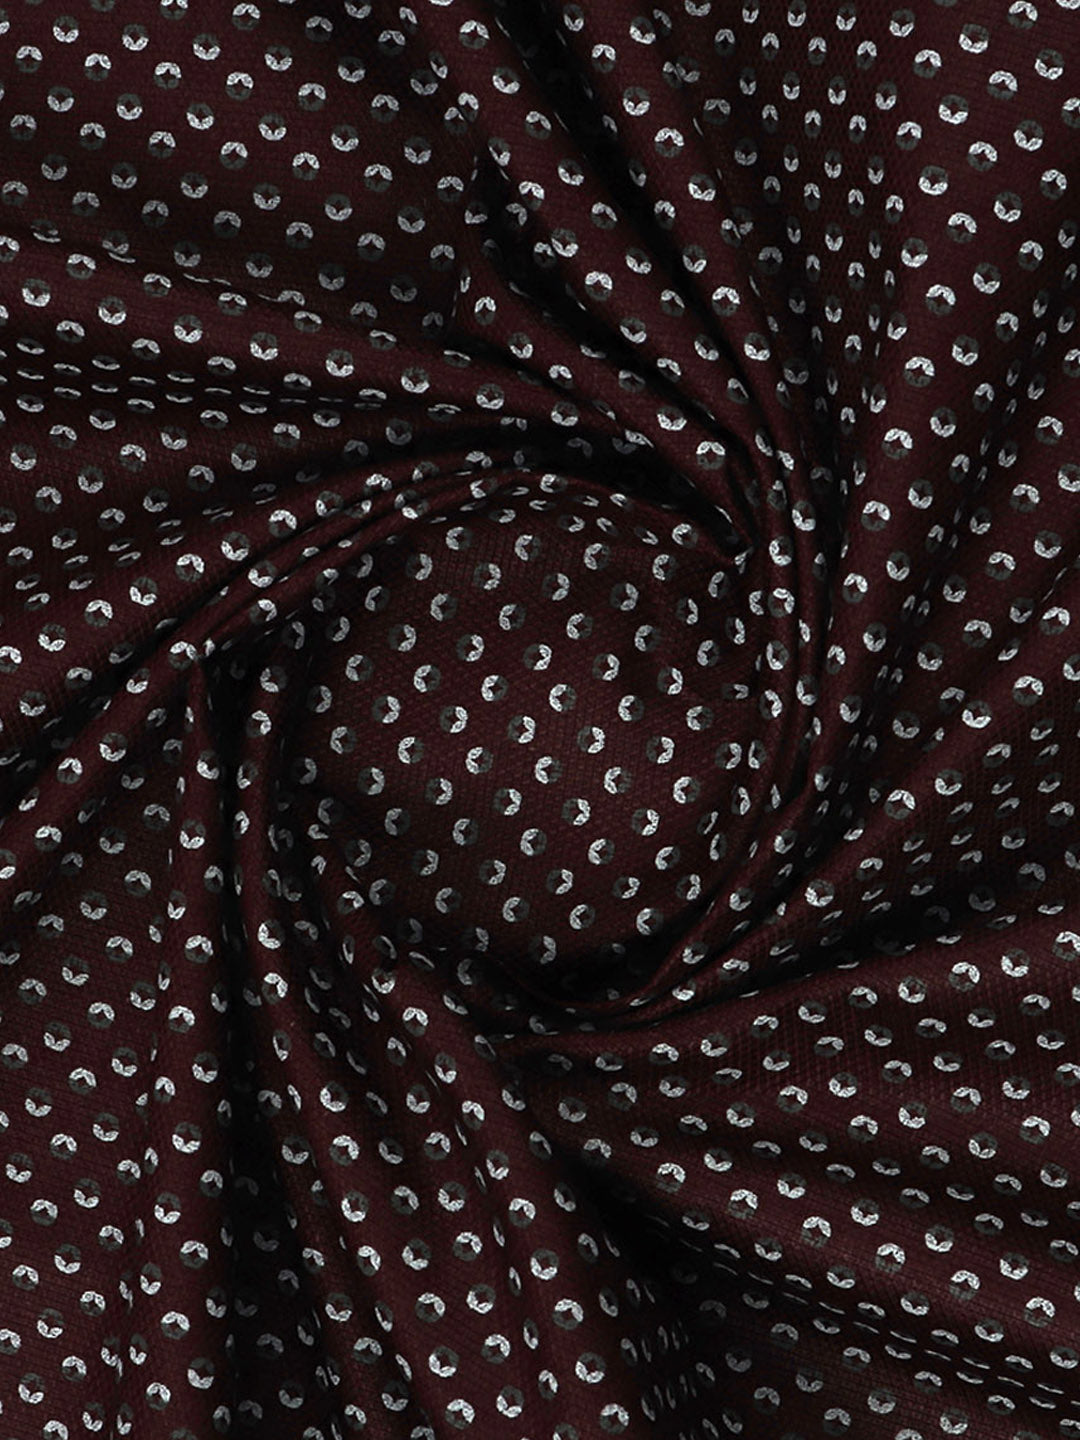 100% Cotton Maroon Over All Printed Shirt Fabric Alpha -Close view